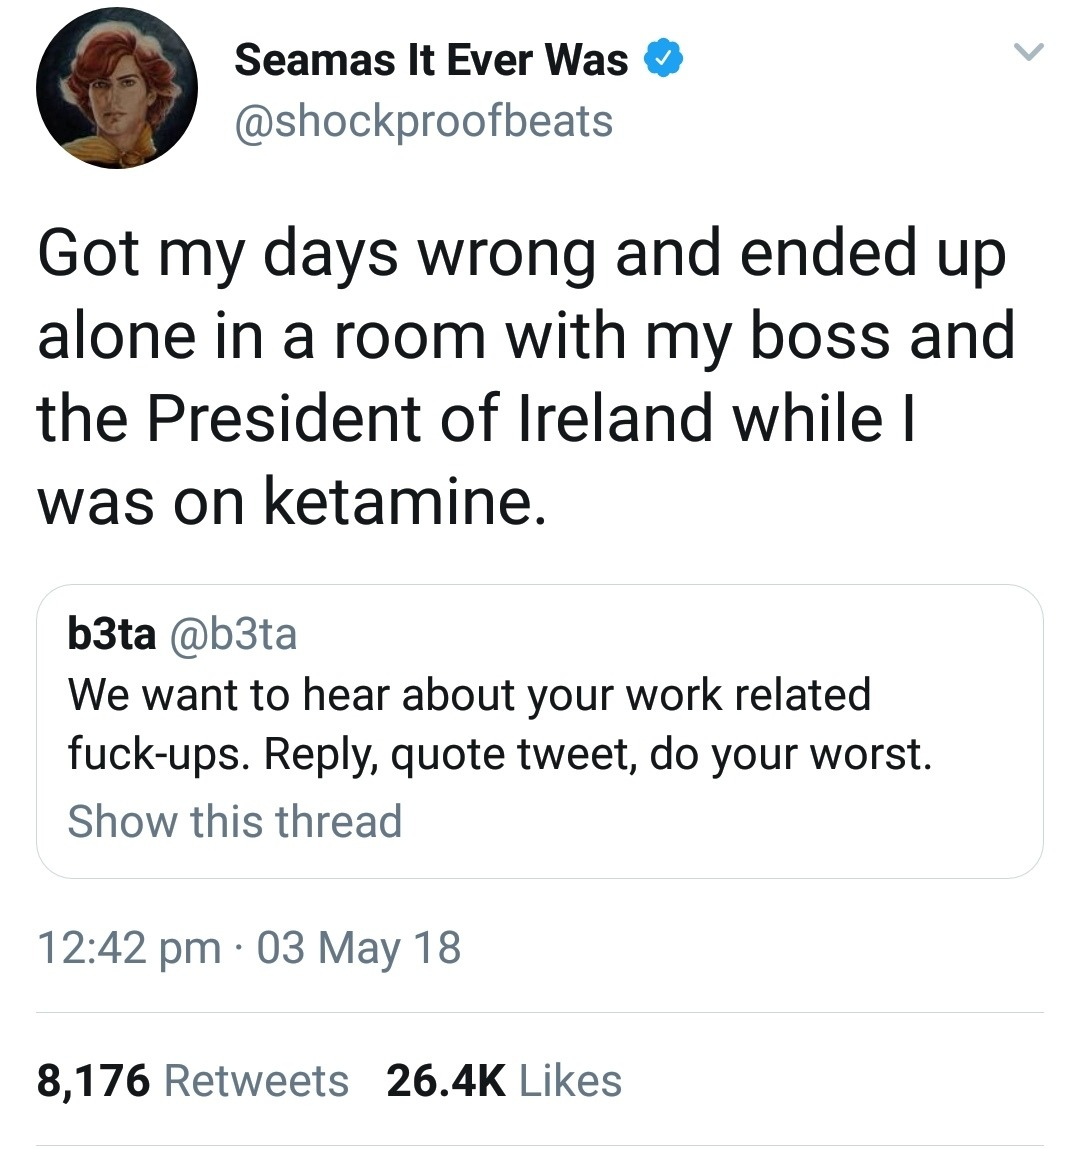 tweet - Seamas It Ever Was Got my days wrong and ended up alone in a room with my boss and the President of Ireland while | was on ketamine. b3ta We want to hear about your work related fuckups. , quote tweet, do your worst. Show this thread 03 May 18 8,1